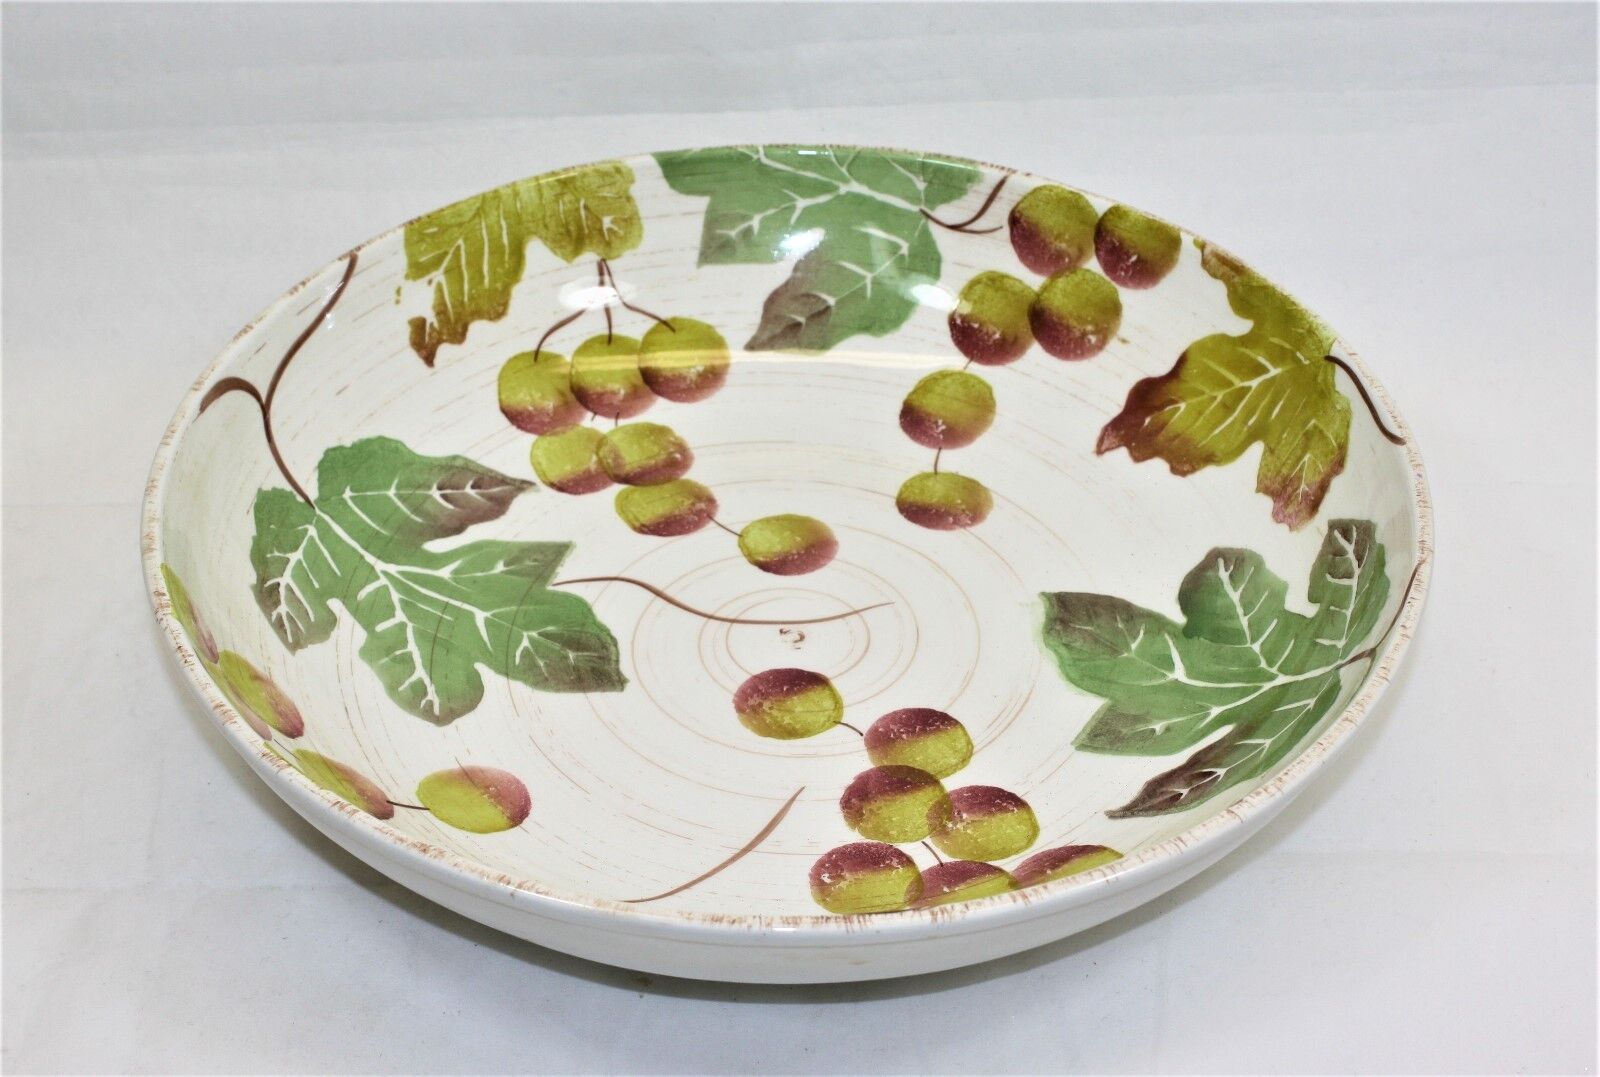 Loucarte Bowl 13“ Round Serving Bowl Hand Painted Grape Motif Made in Portugal